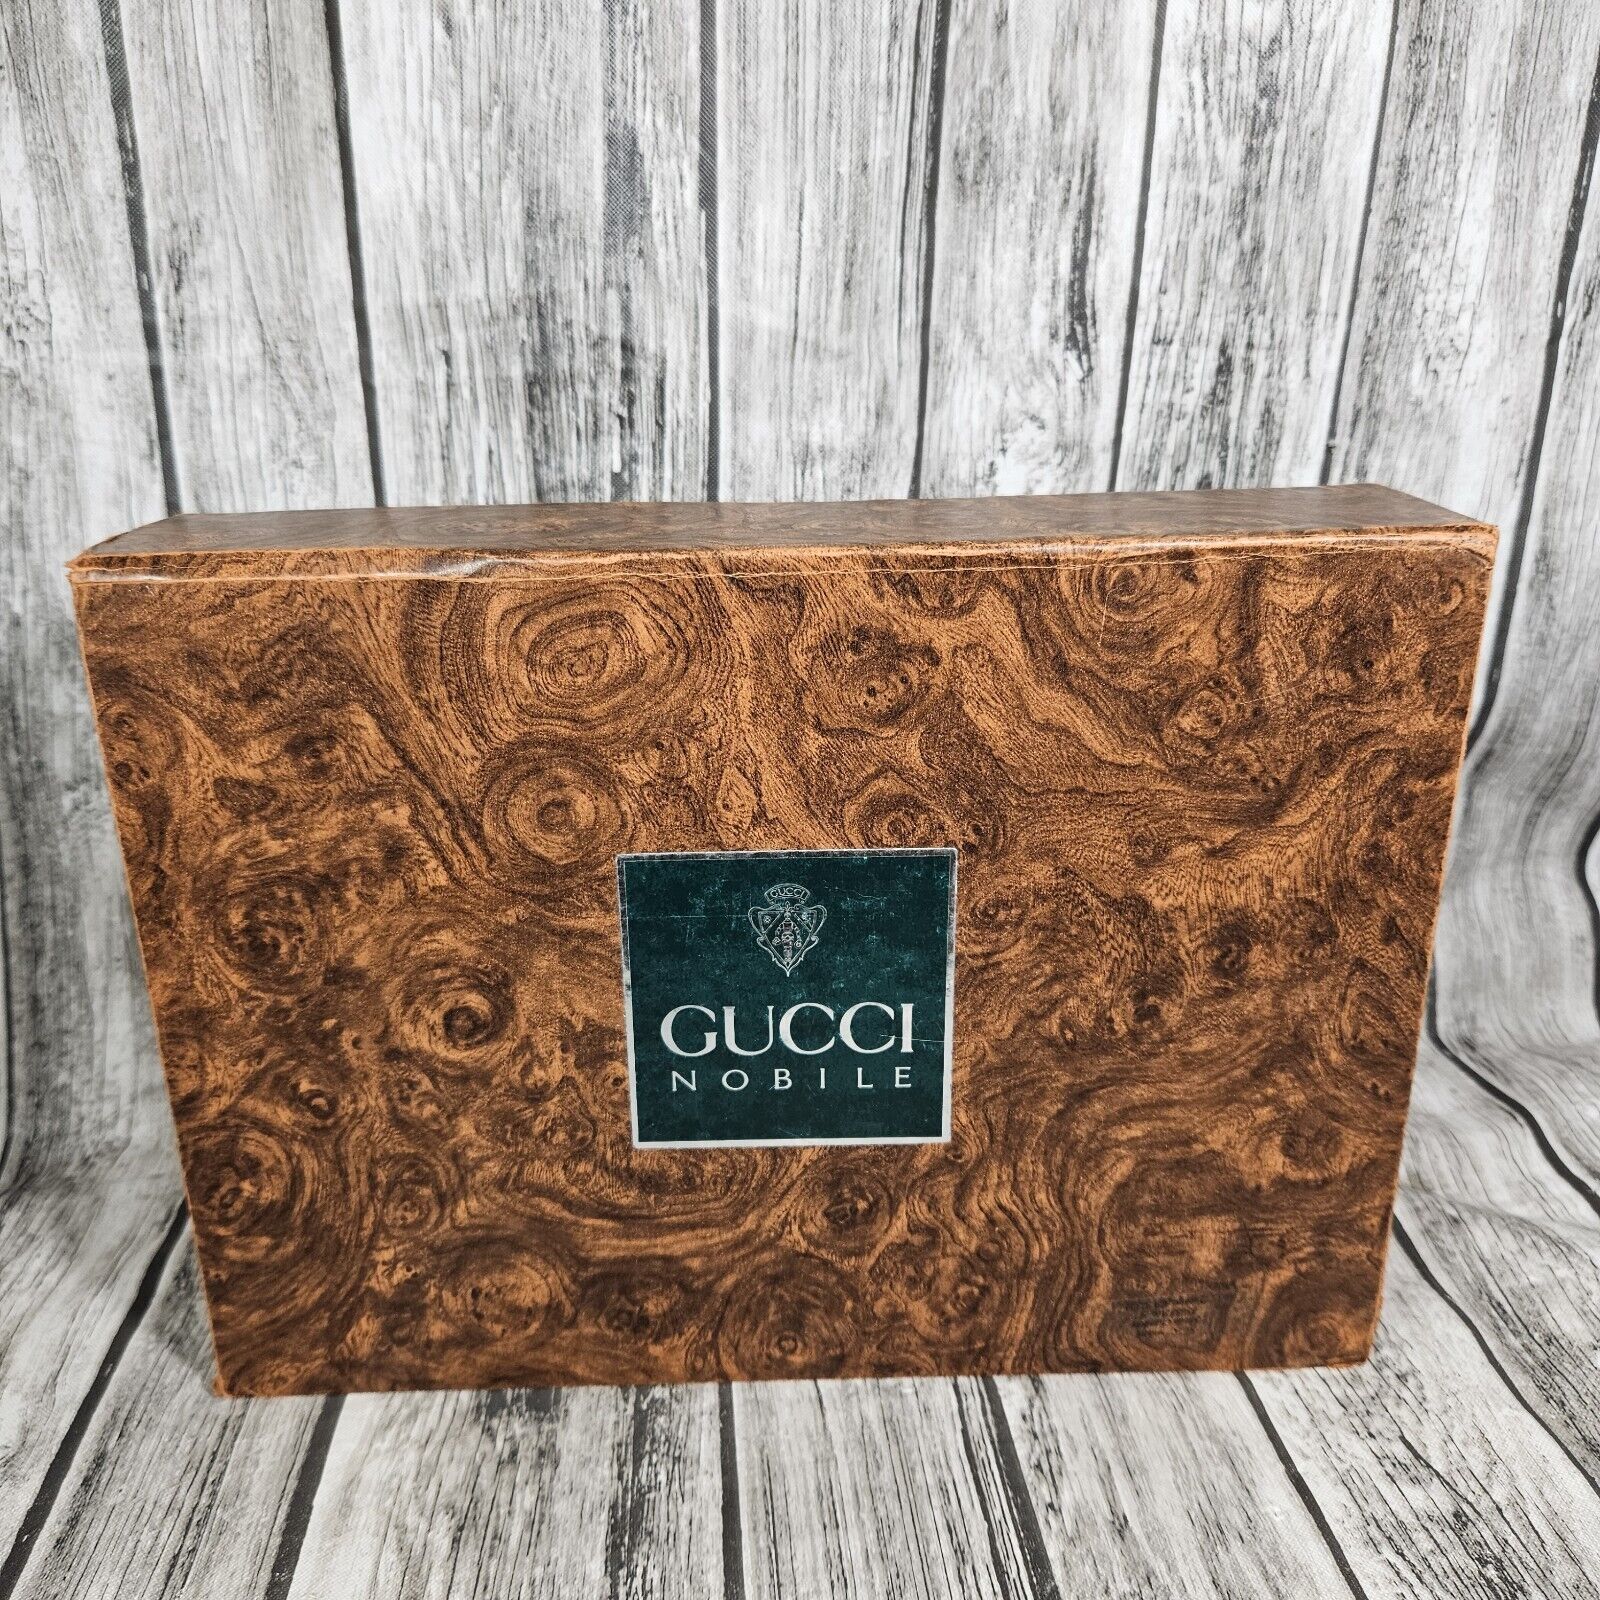 Vintage Gucci Nobile Empty Box Rare Gucci Nobile Fragrance Shower Grooming Box